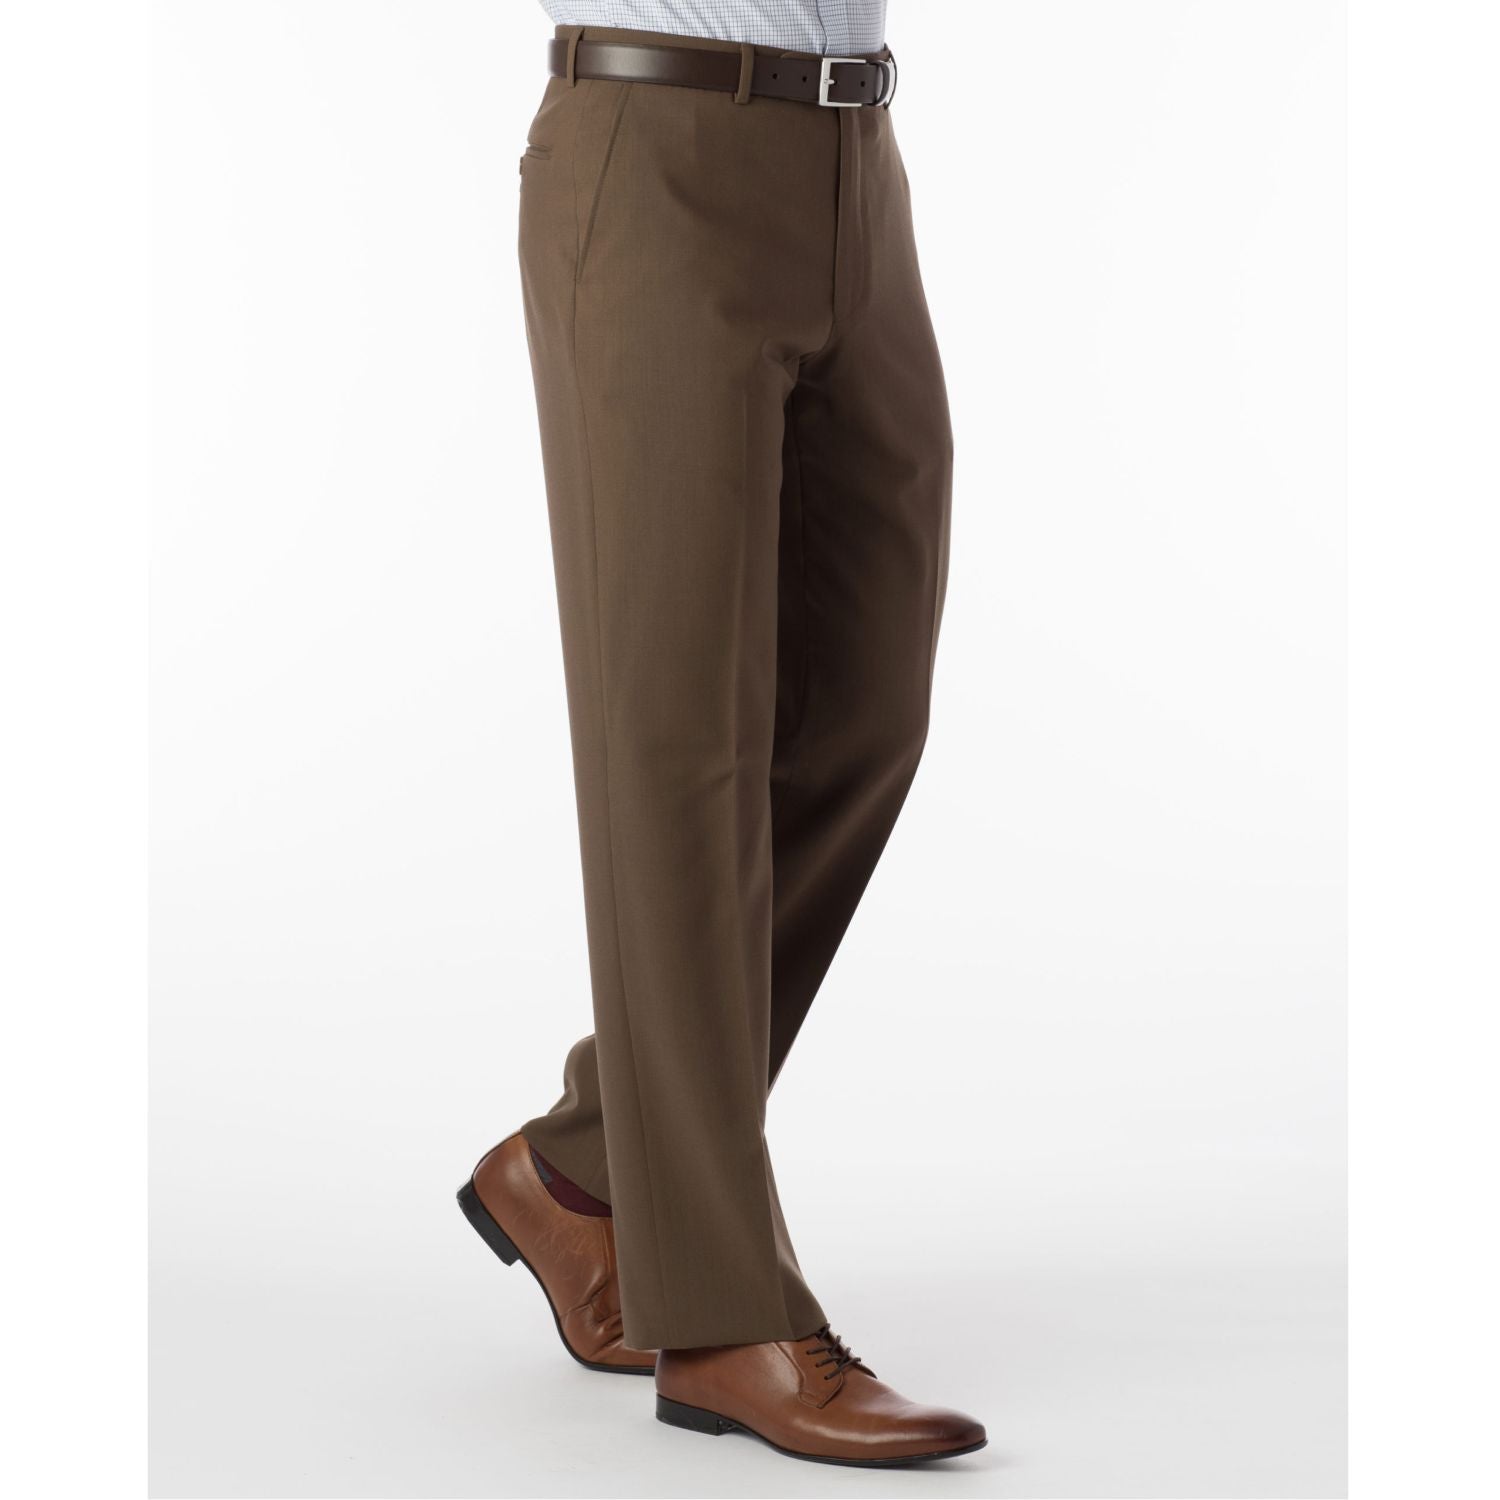 Super 120s Wool Travel Twill Comfort-EZE Trouser in Saddle (Flat Front Models) by Ballin